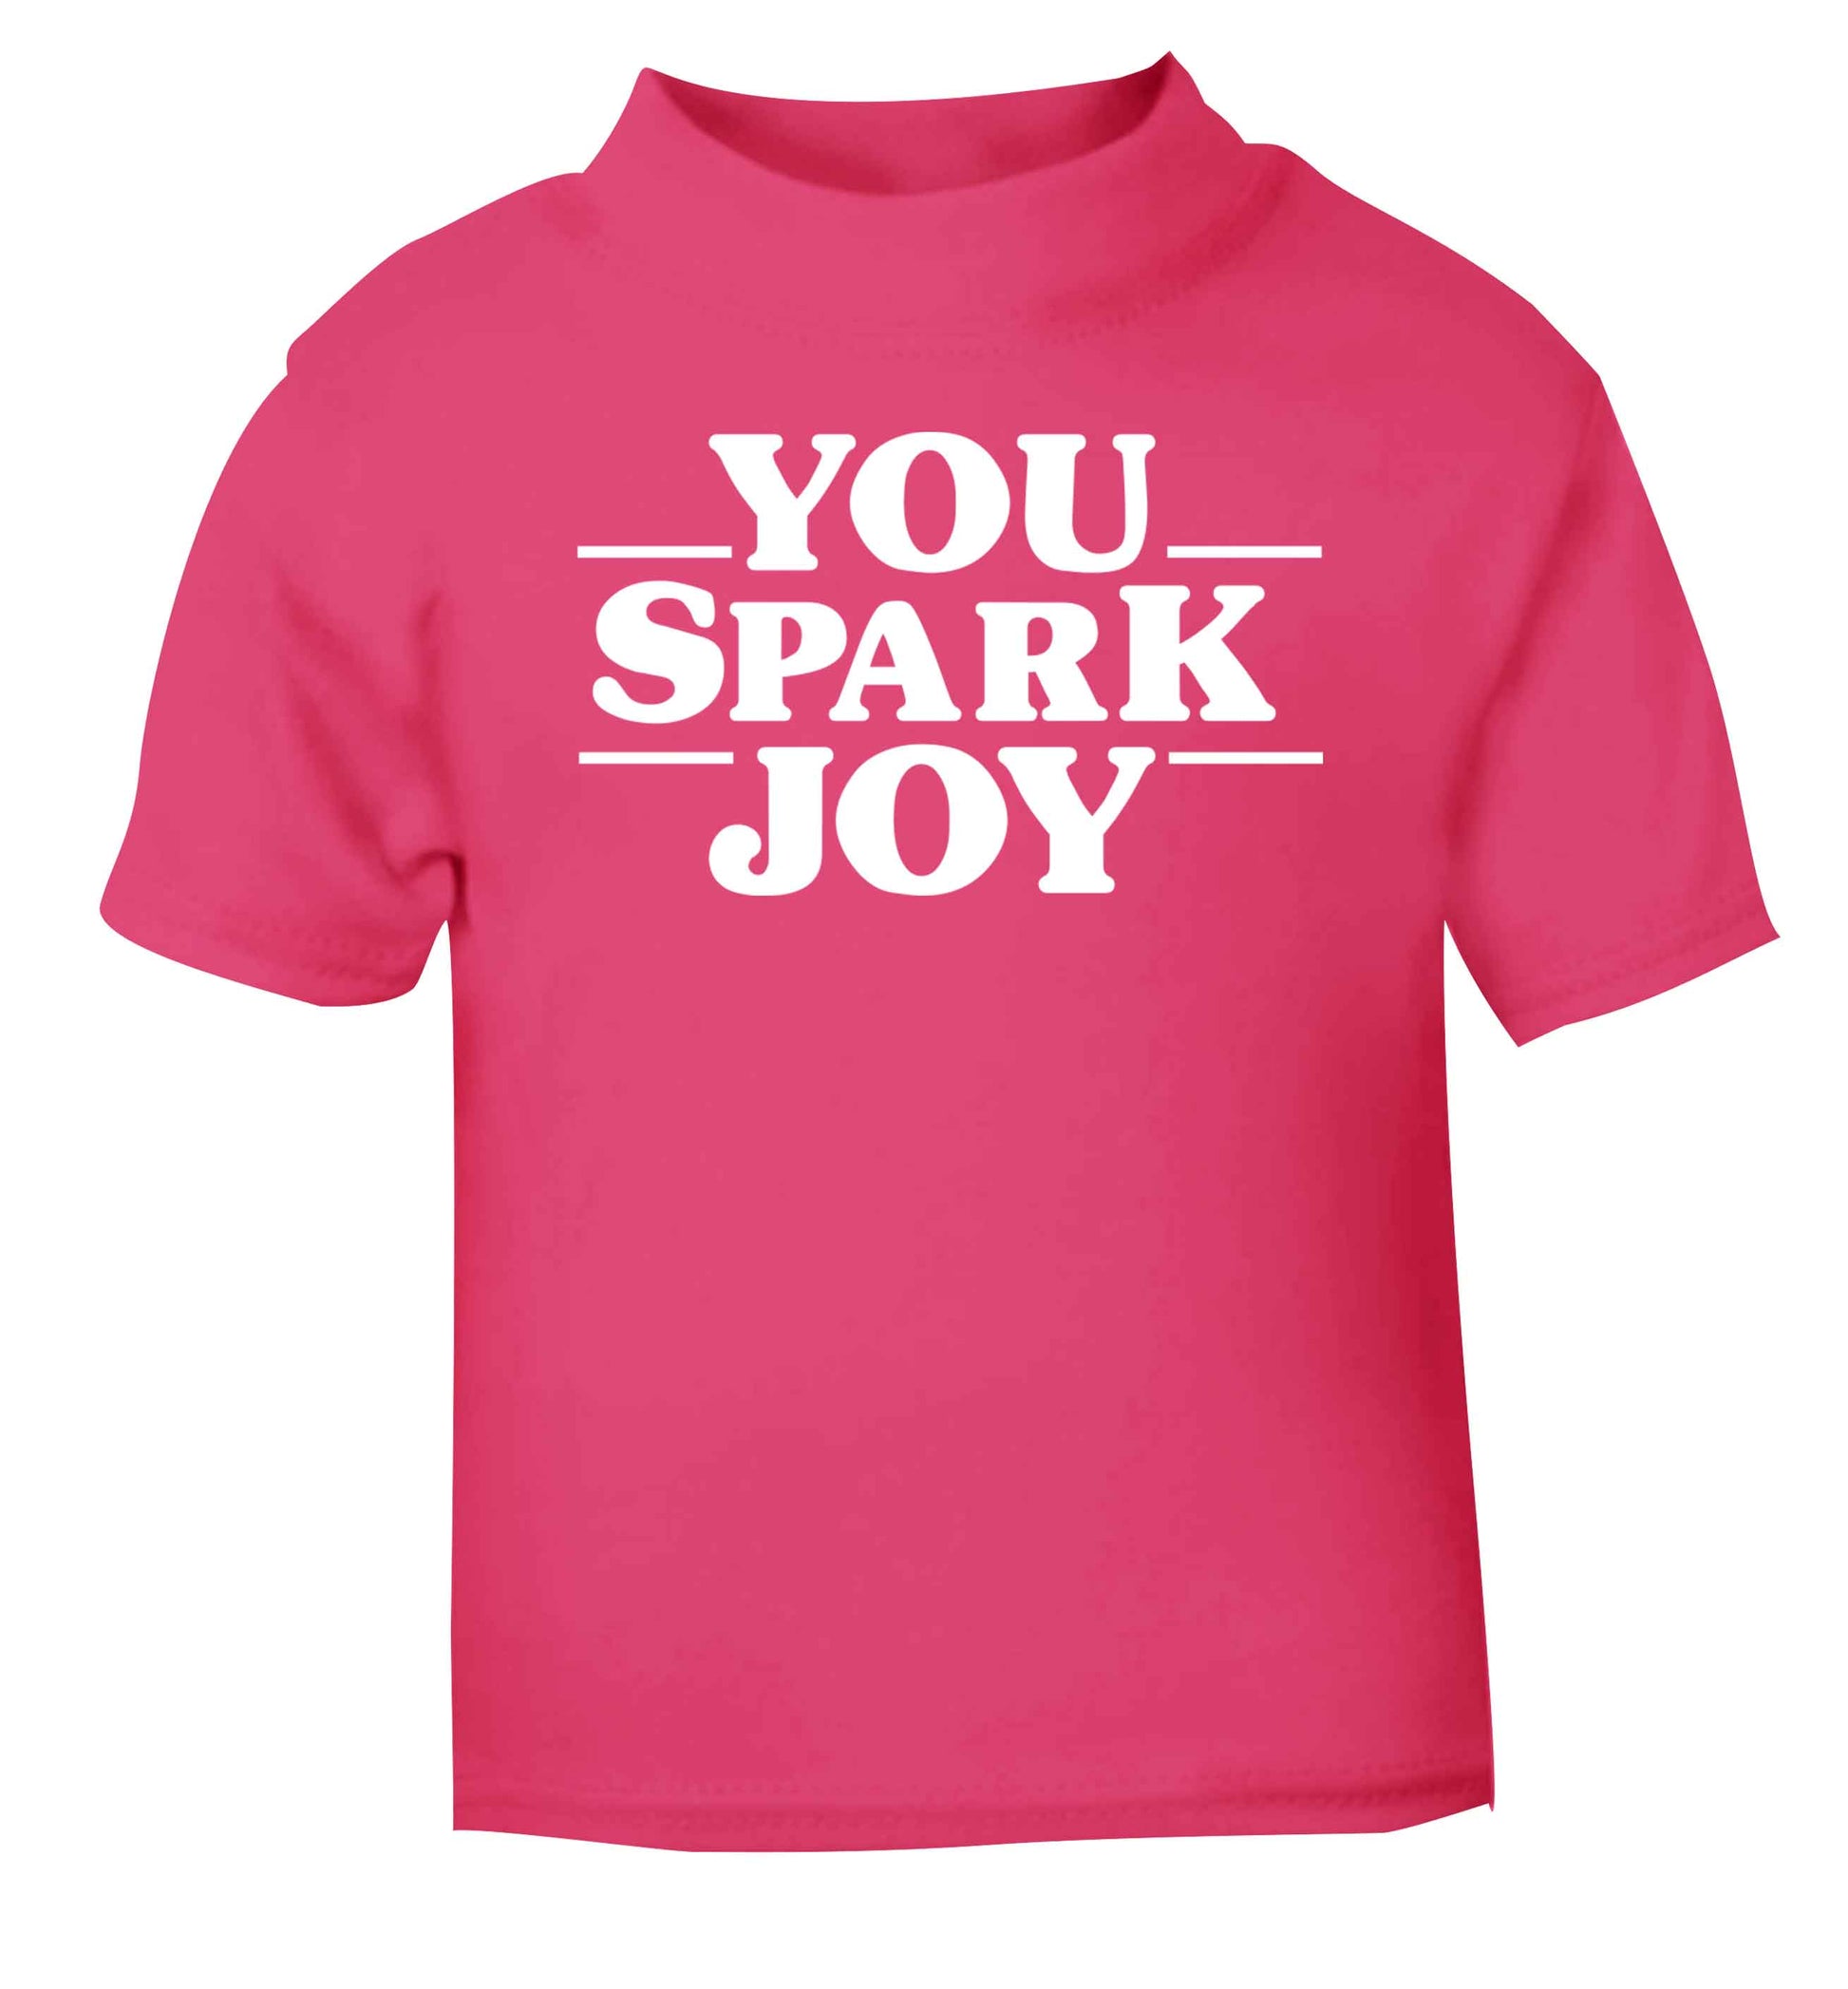 You spark joy pink baby toddler Tshirt 2 Years